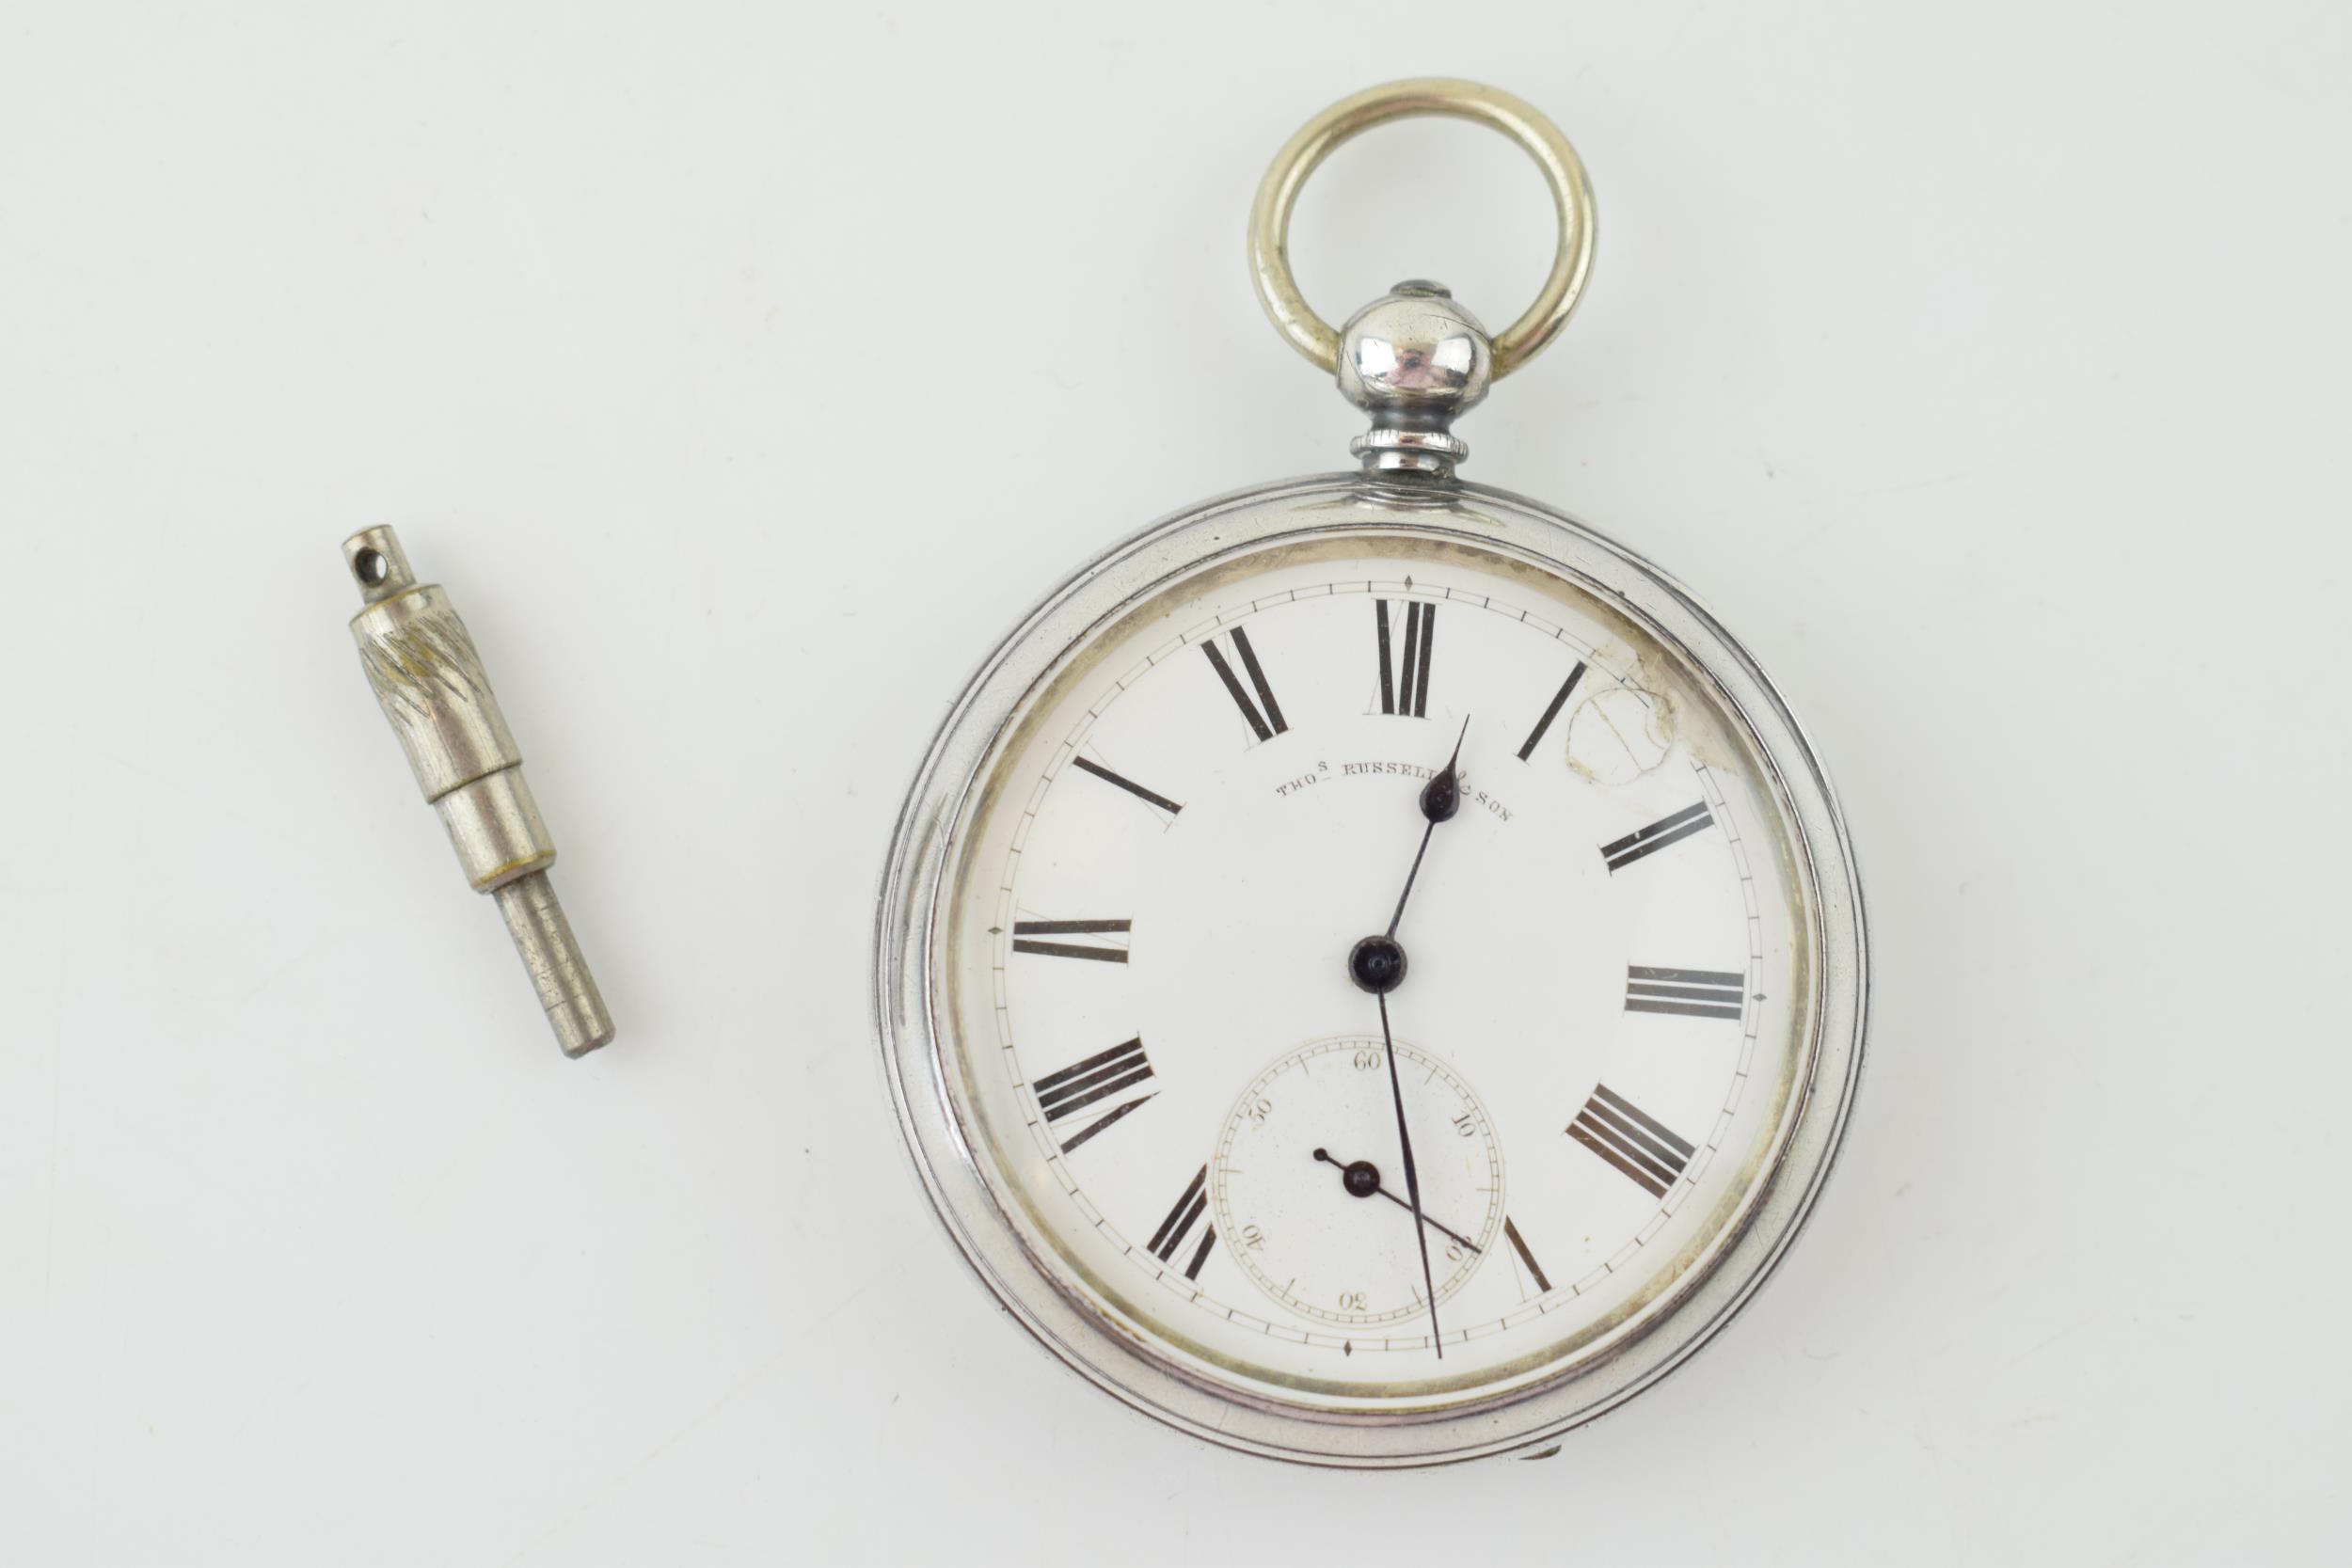 Hallmarked silver cased pocket watch, Thomas Russell & Son, Chester 1880, damage to dial, with